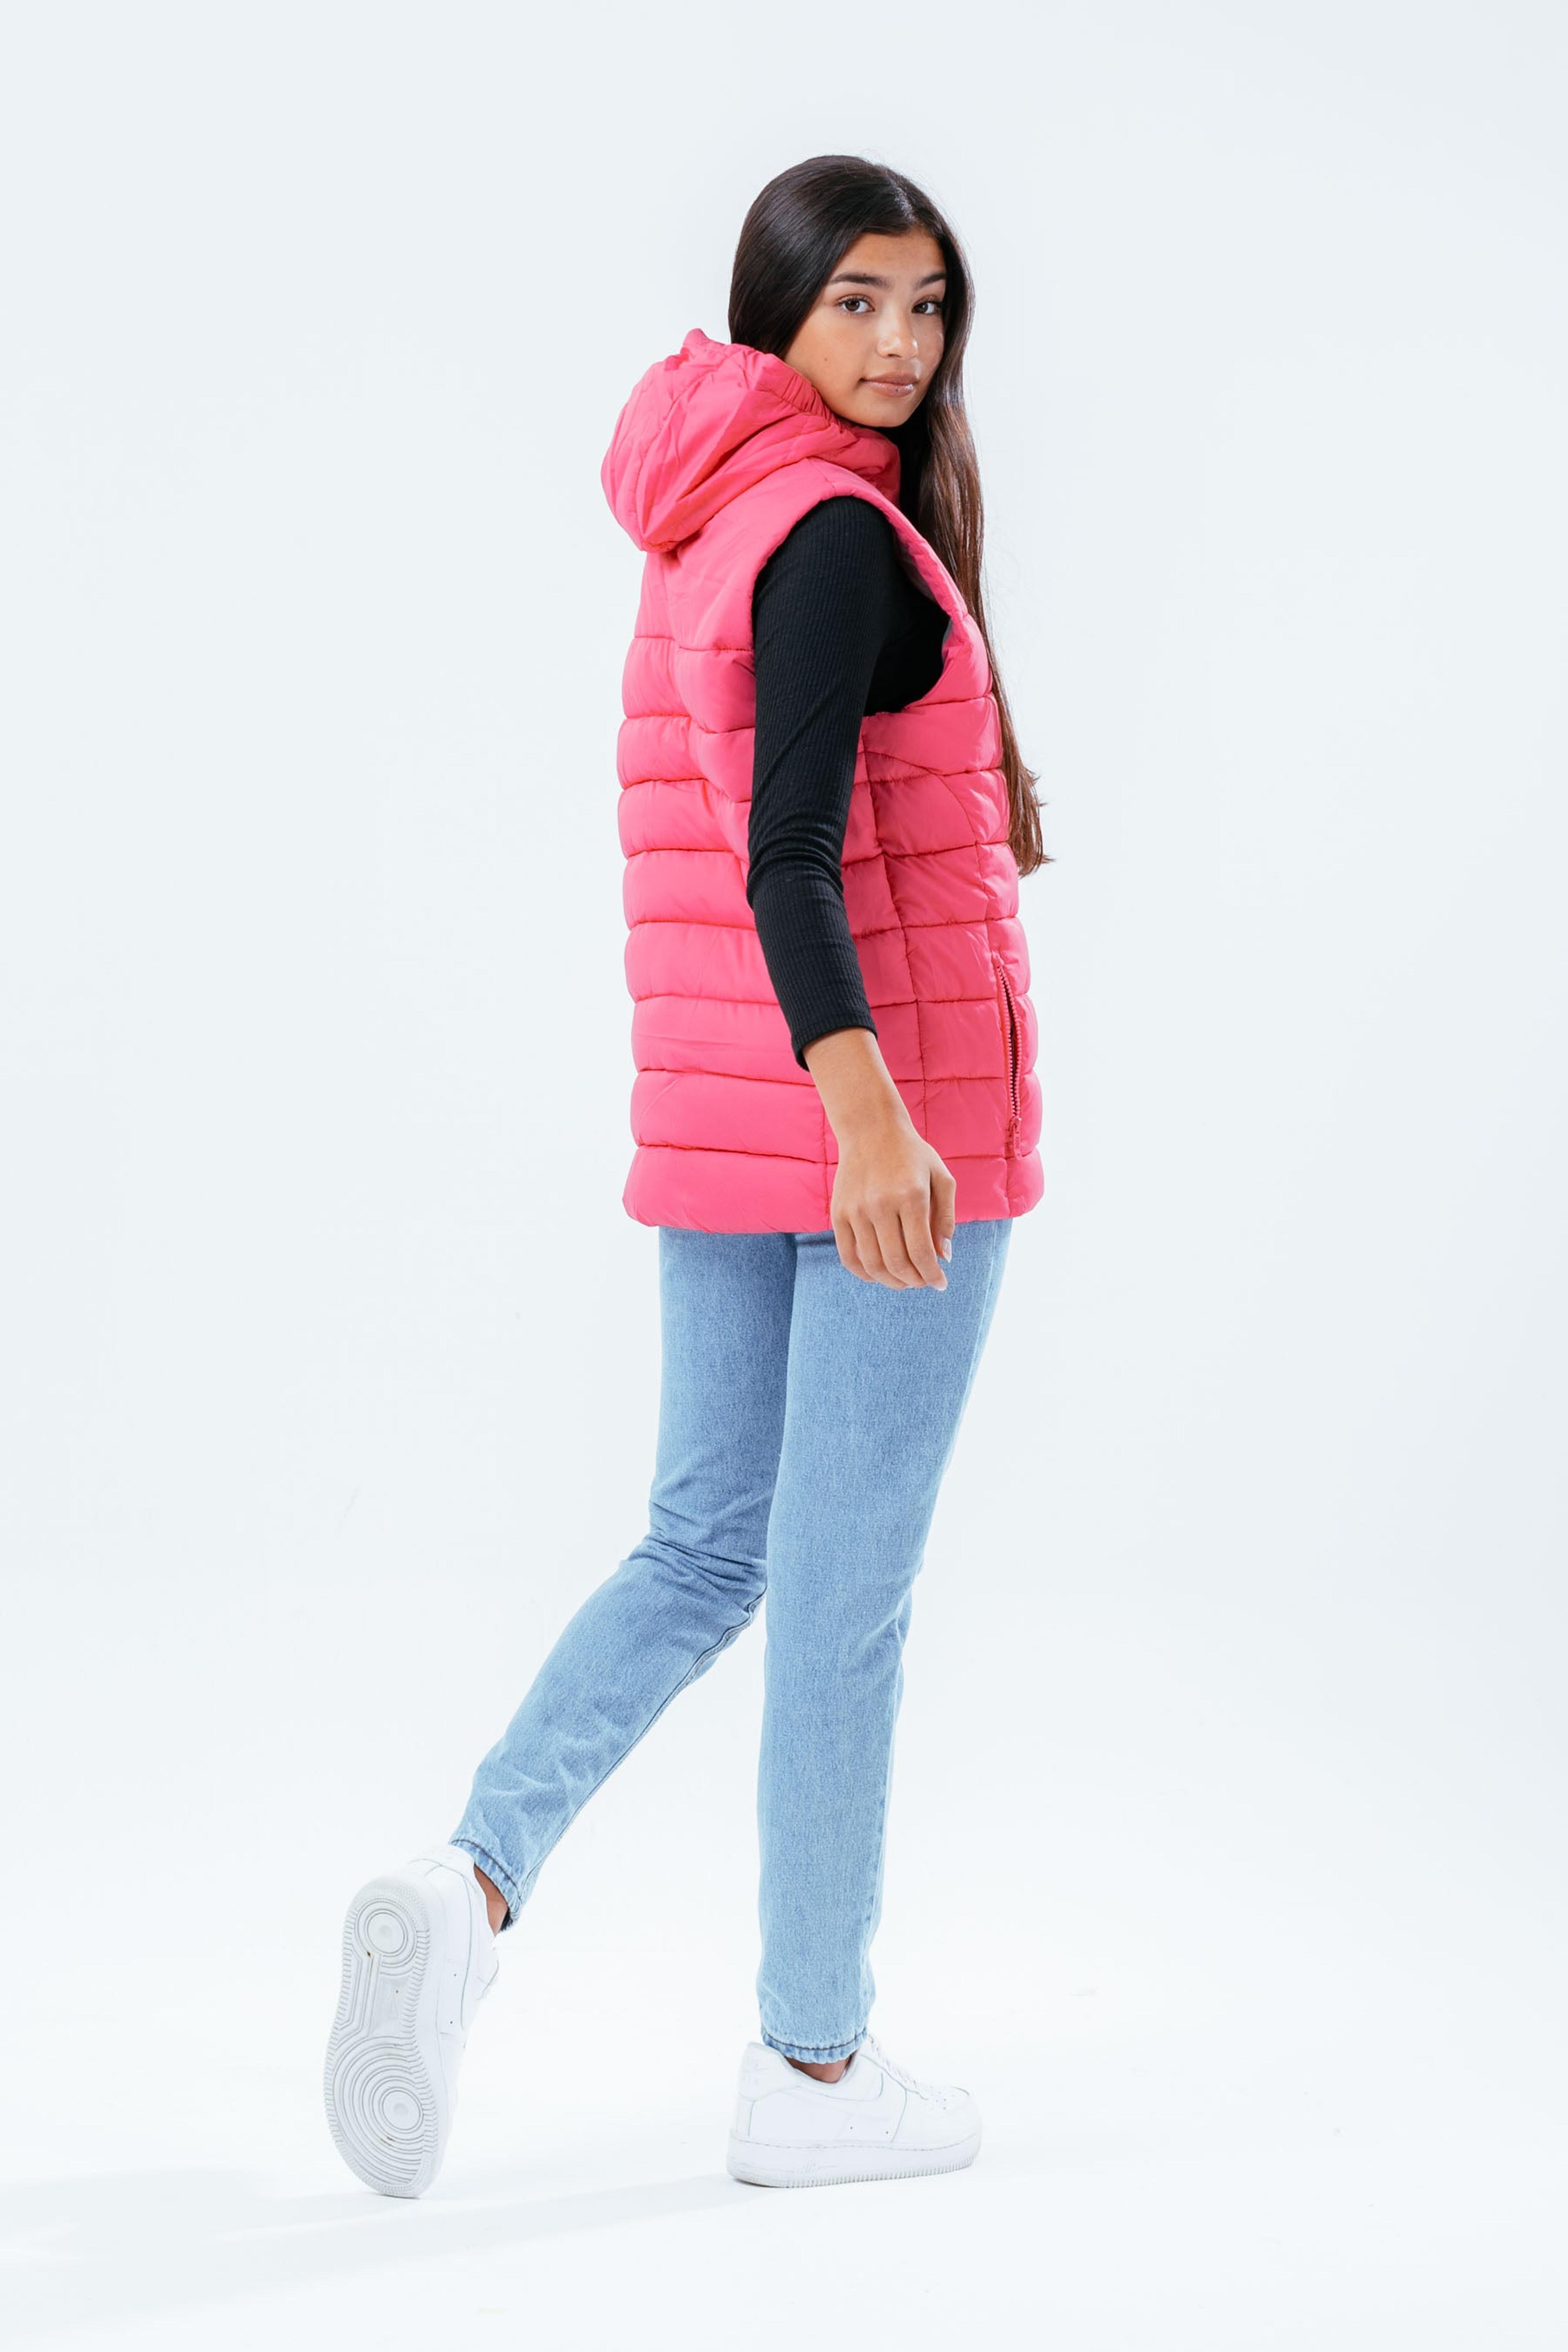 Alternate View 2 of HYPE HOT PINK GIRLS GILET